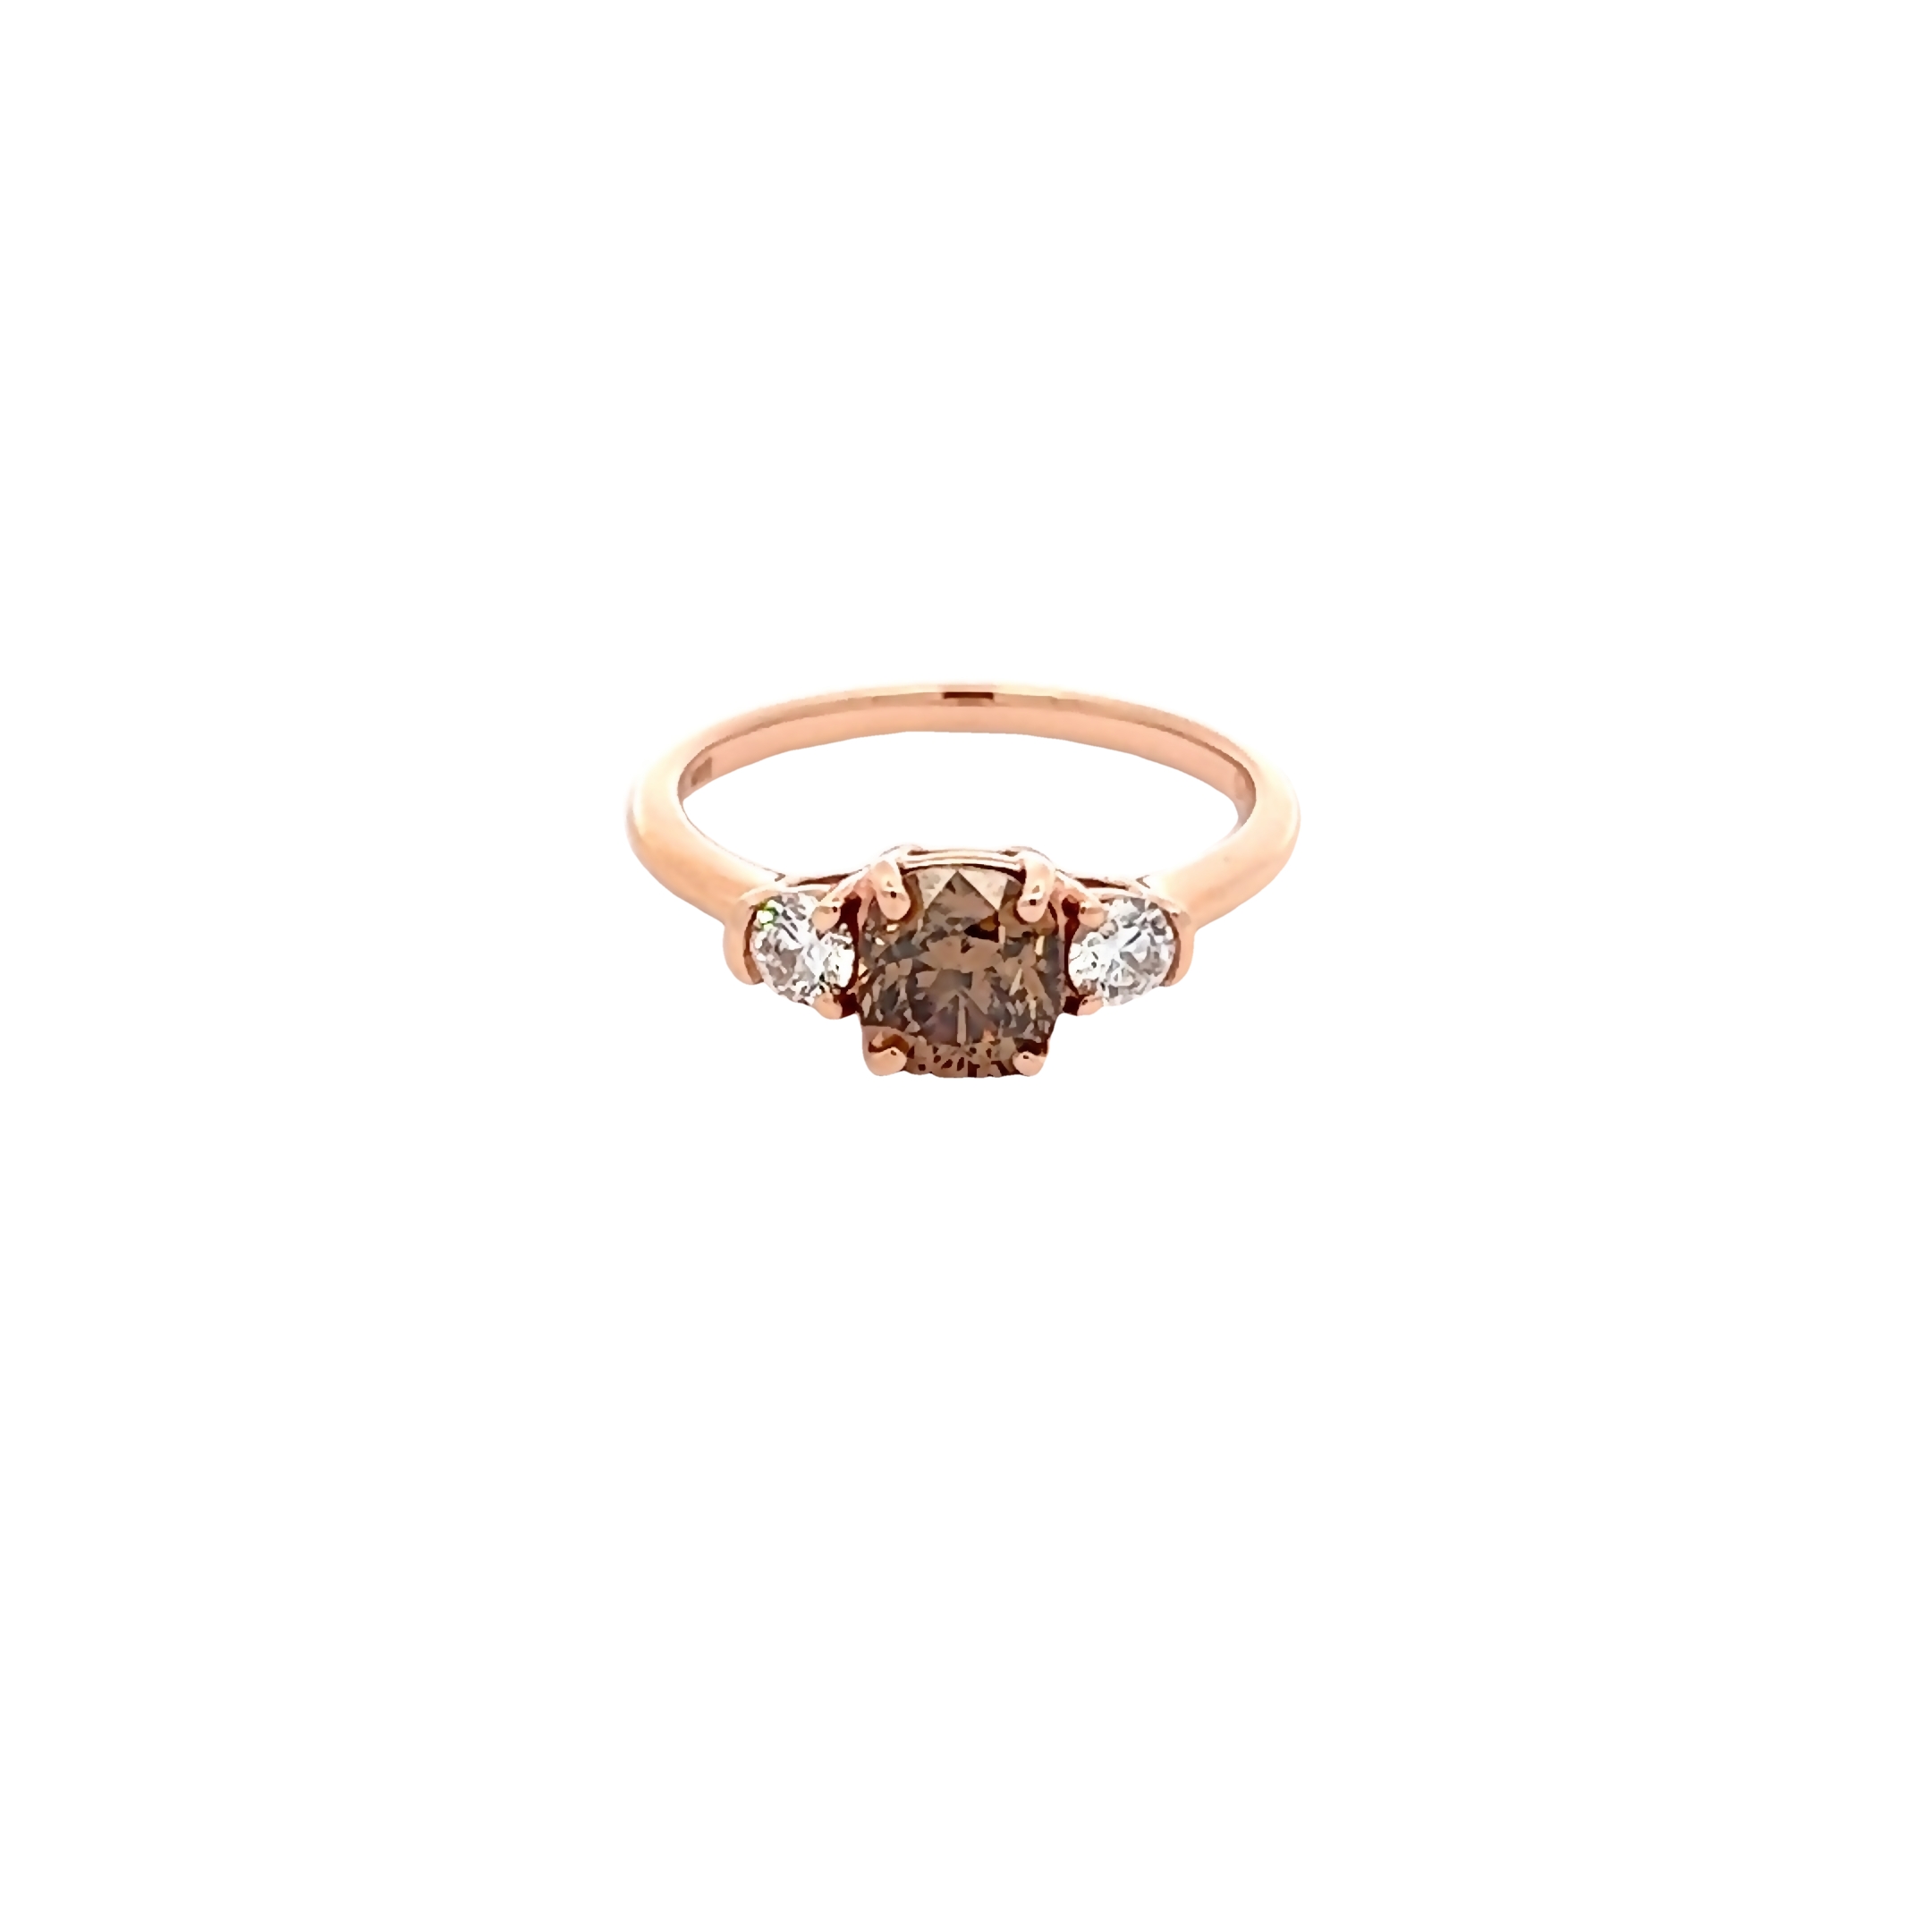 14 Karat rose gold ring with One 1.02Ct cushion chocolate Diamond and 2=0.25 total weight round brilliant G VS Diamonds. Size 6.5